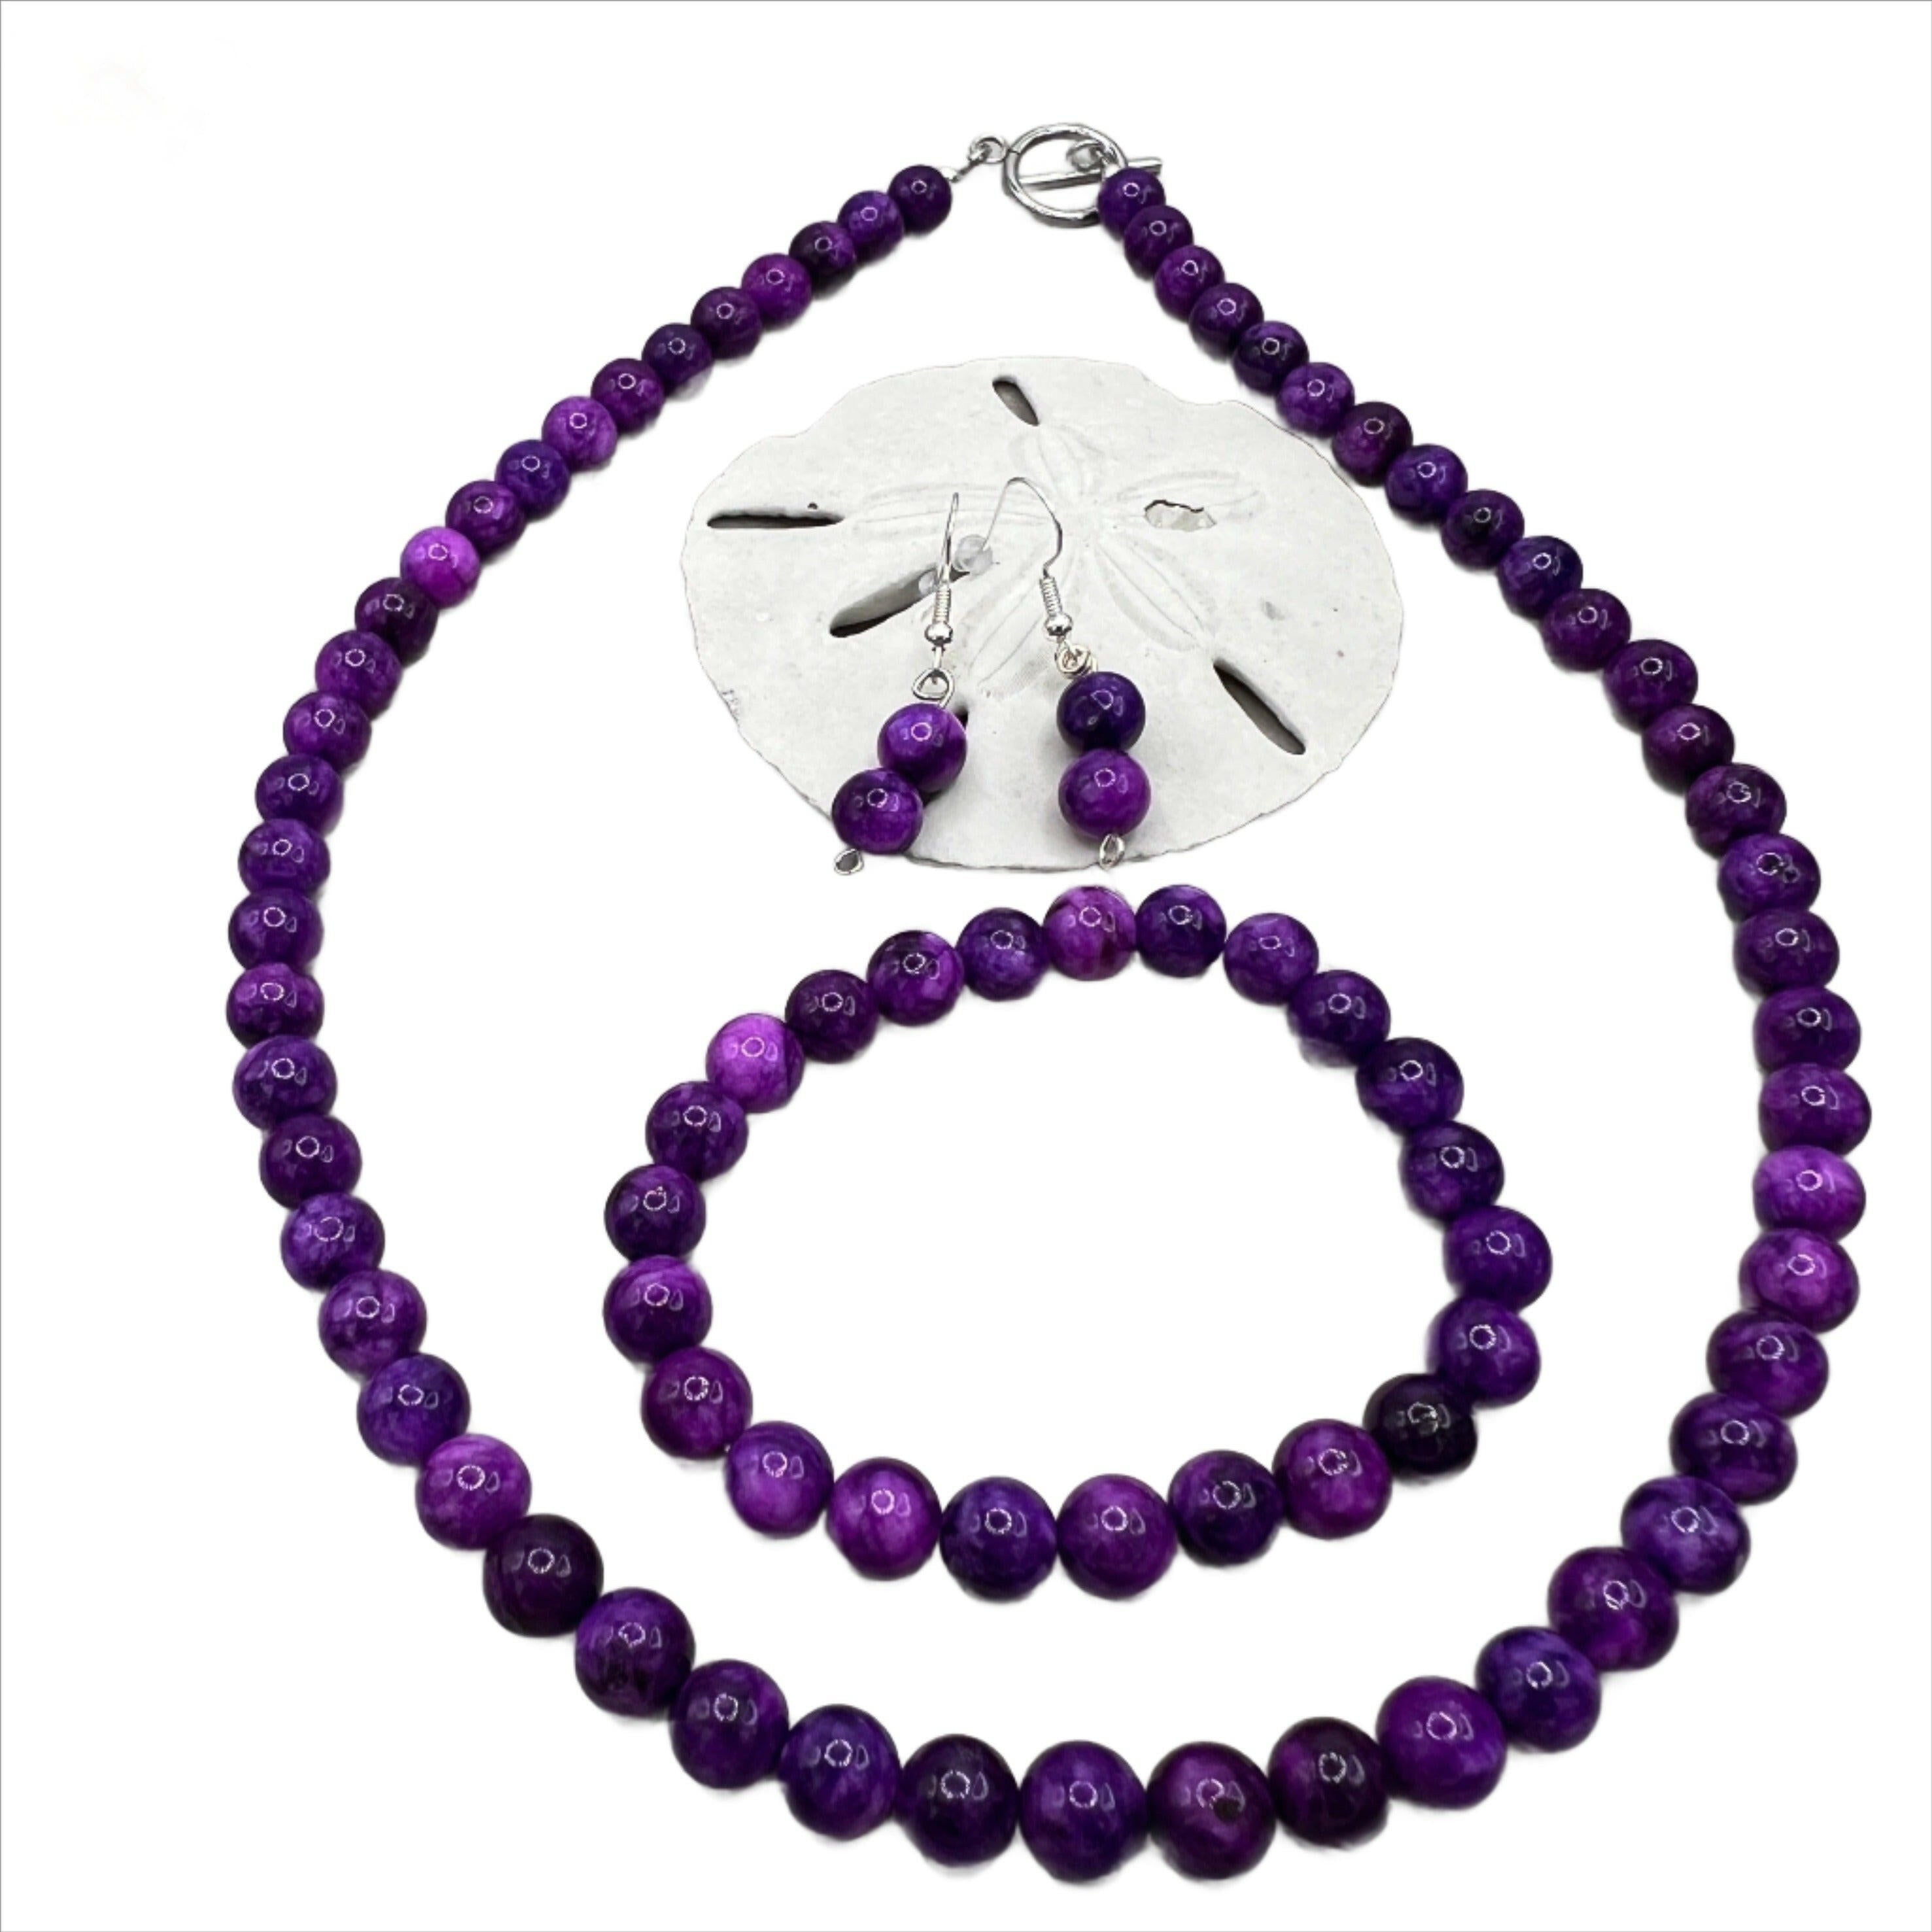 Bec Sue Jewelry Shop Jewelry Set Sugilite Jewelry Set, Necklace, Bracelet, and Earrings, sugilite gemstone Tags 638